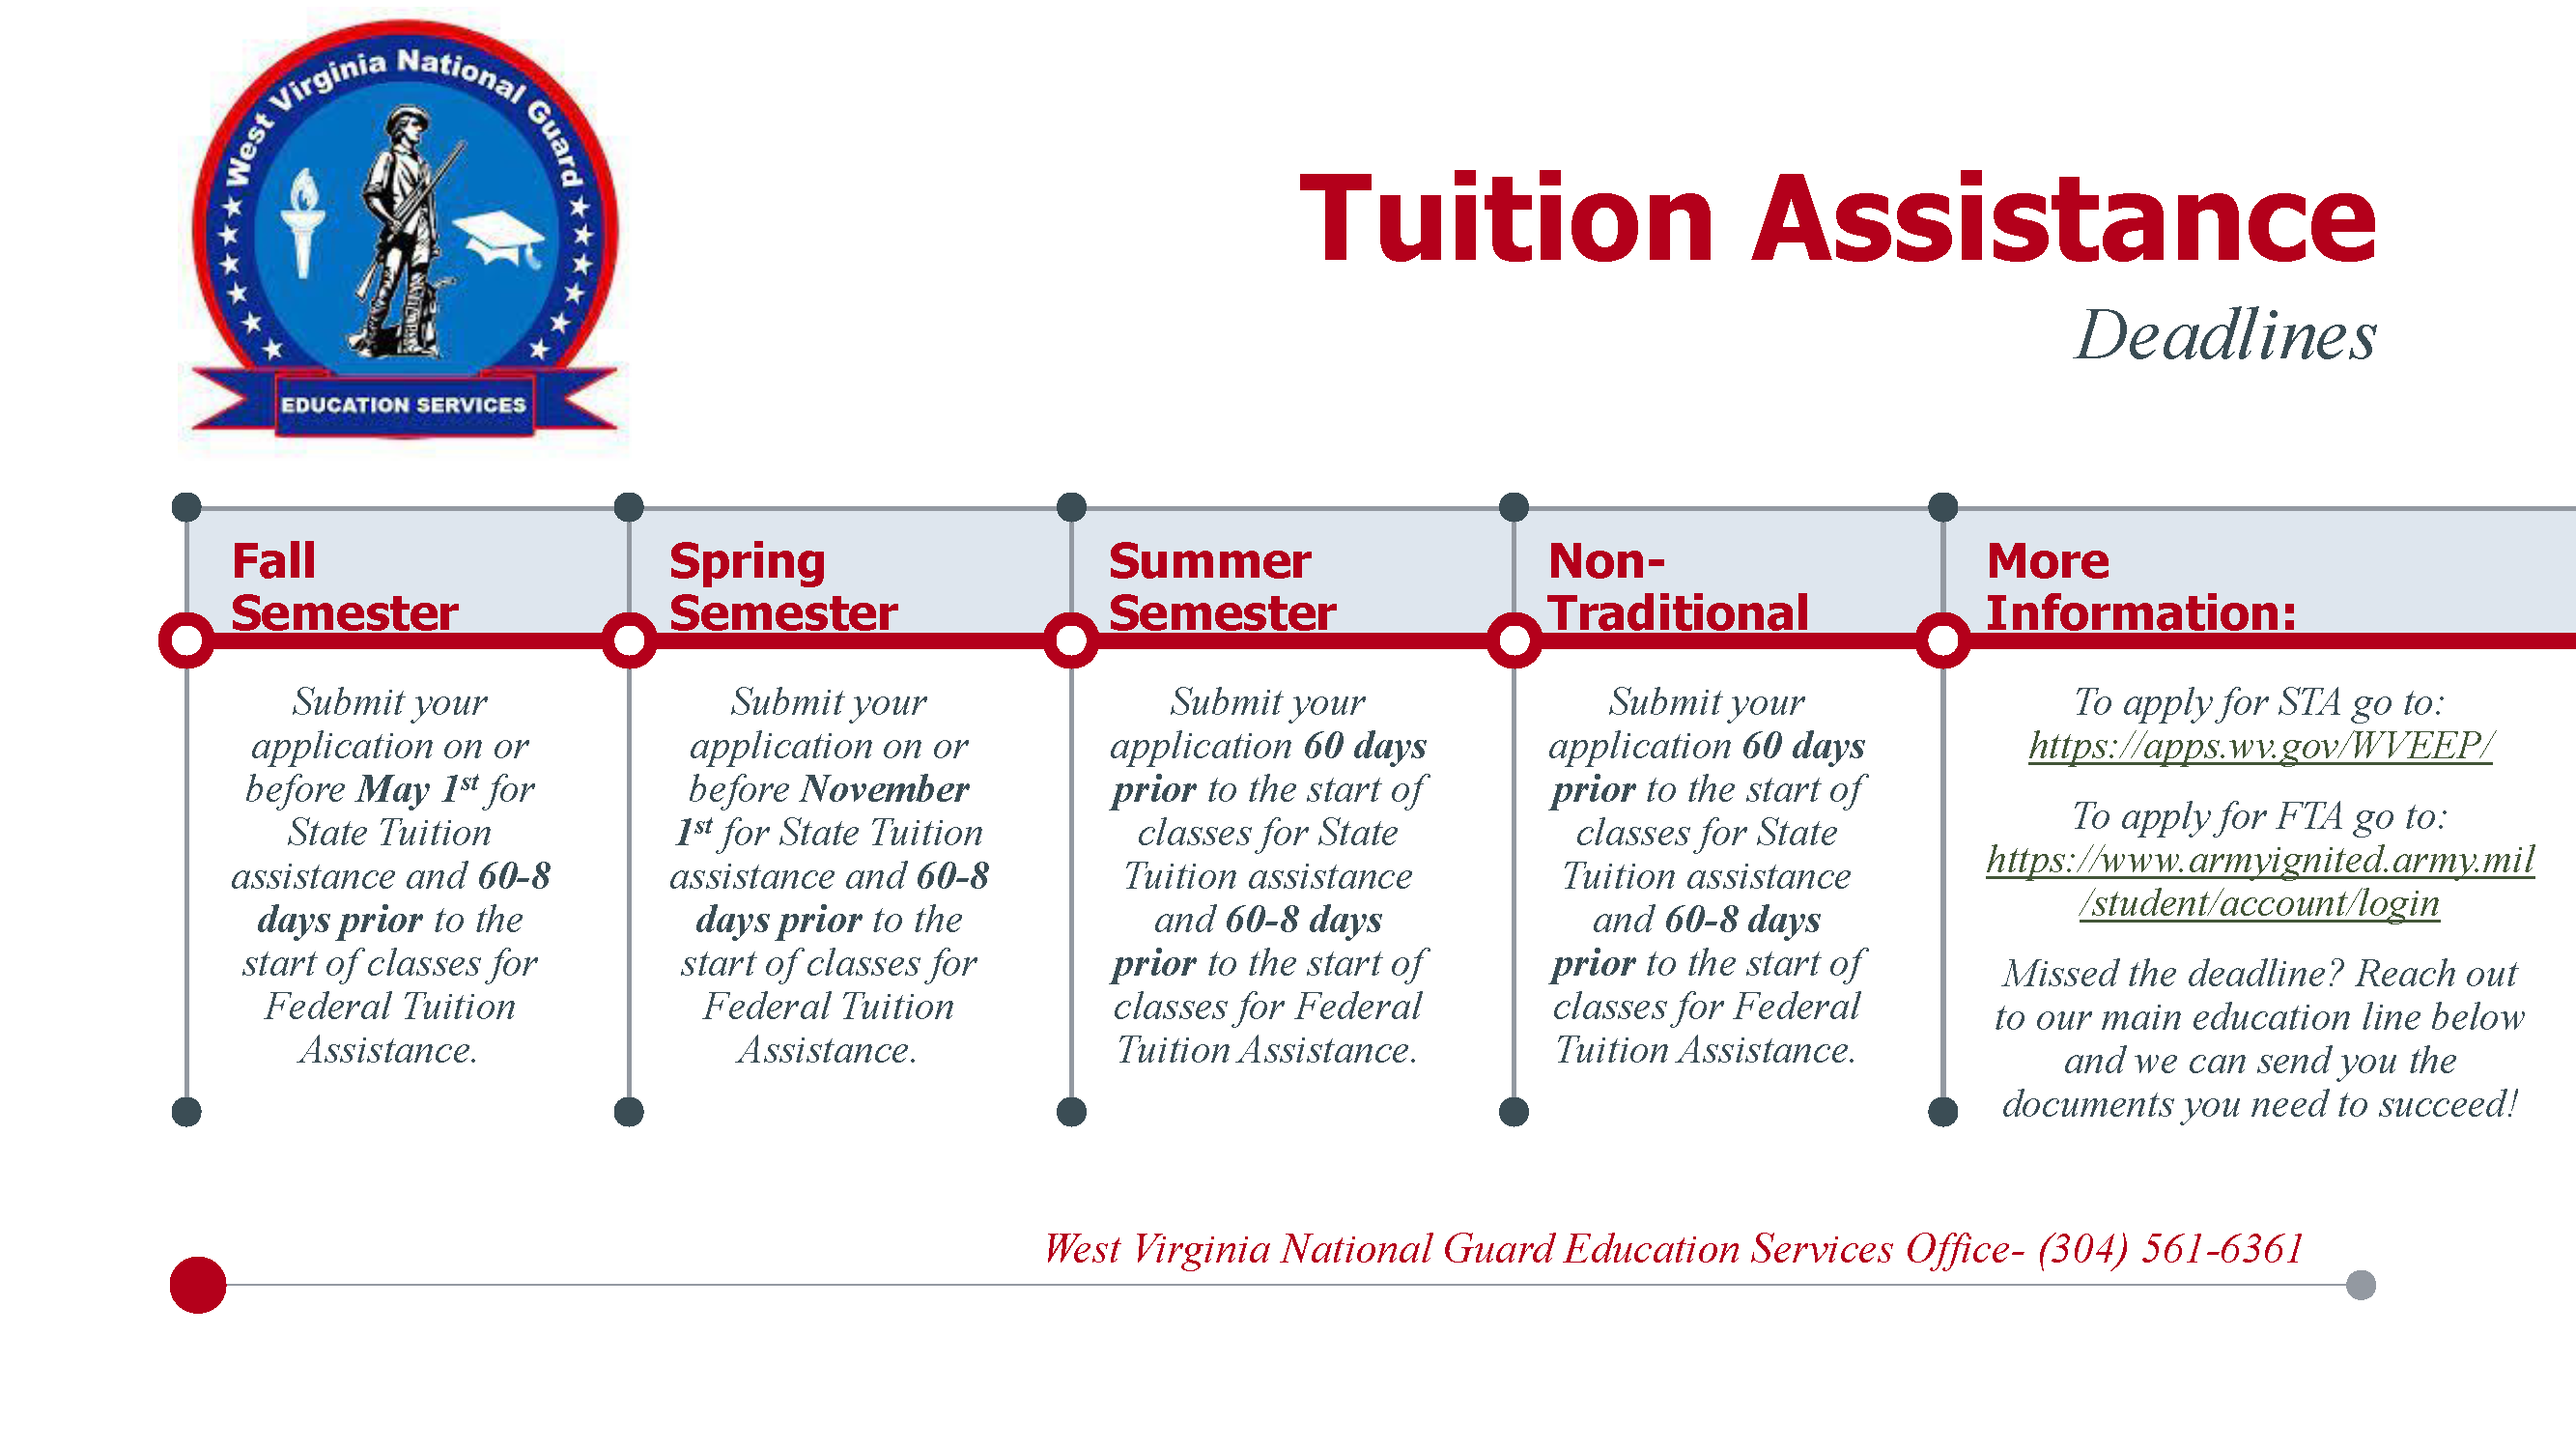 Flyer detailing the deadlines for filing tuition assistance. a repeat of the info found on this page under: deadlines. No new or additional information